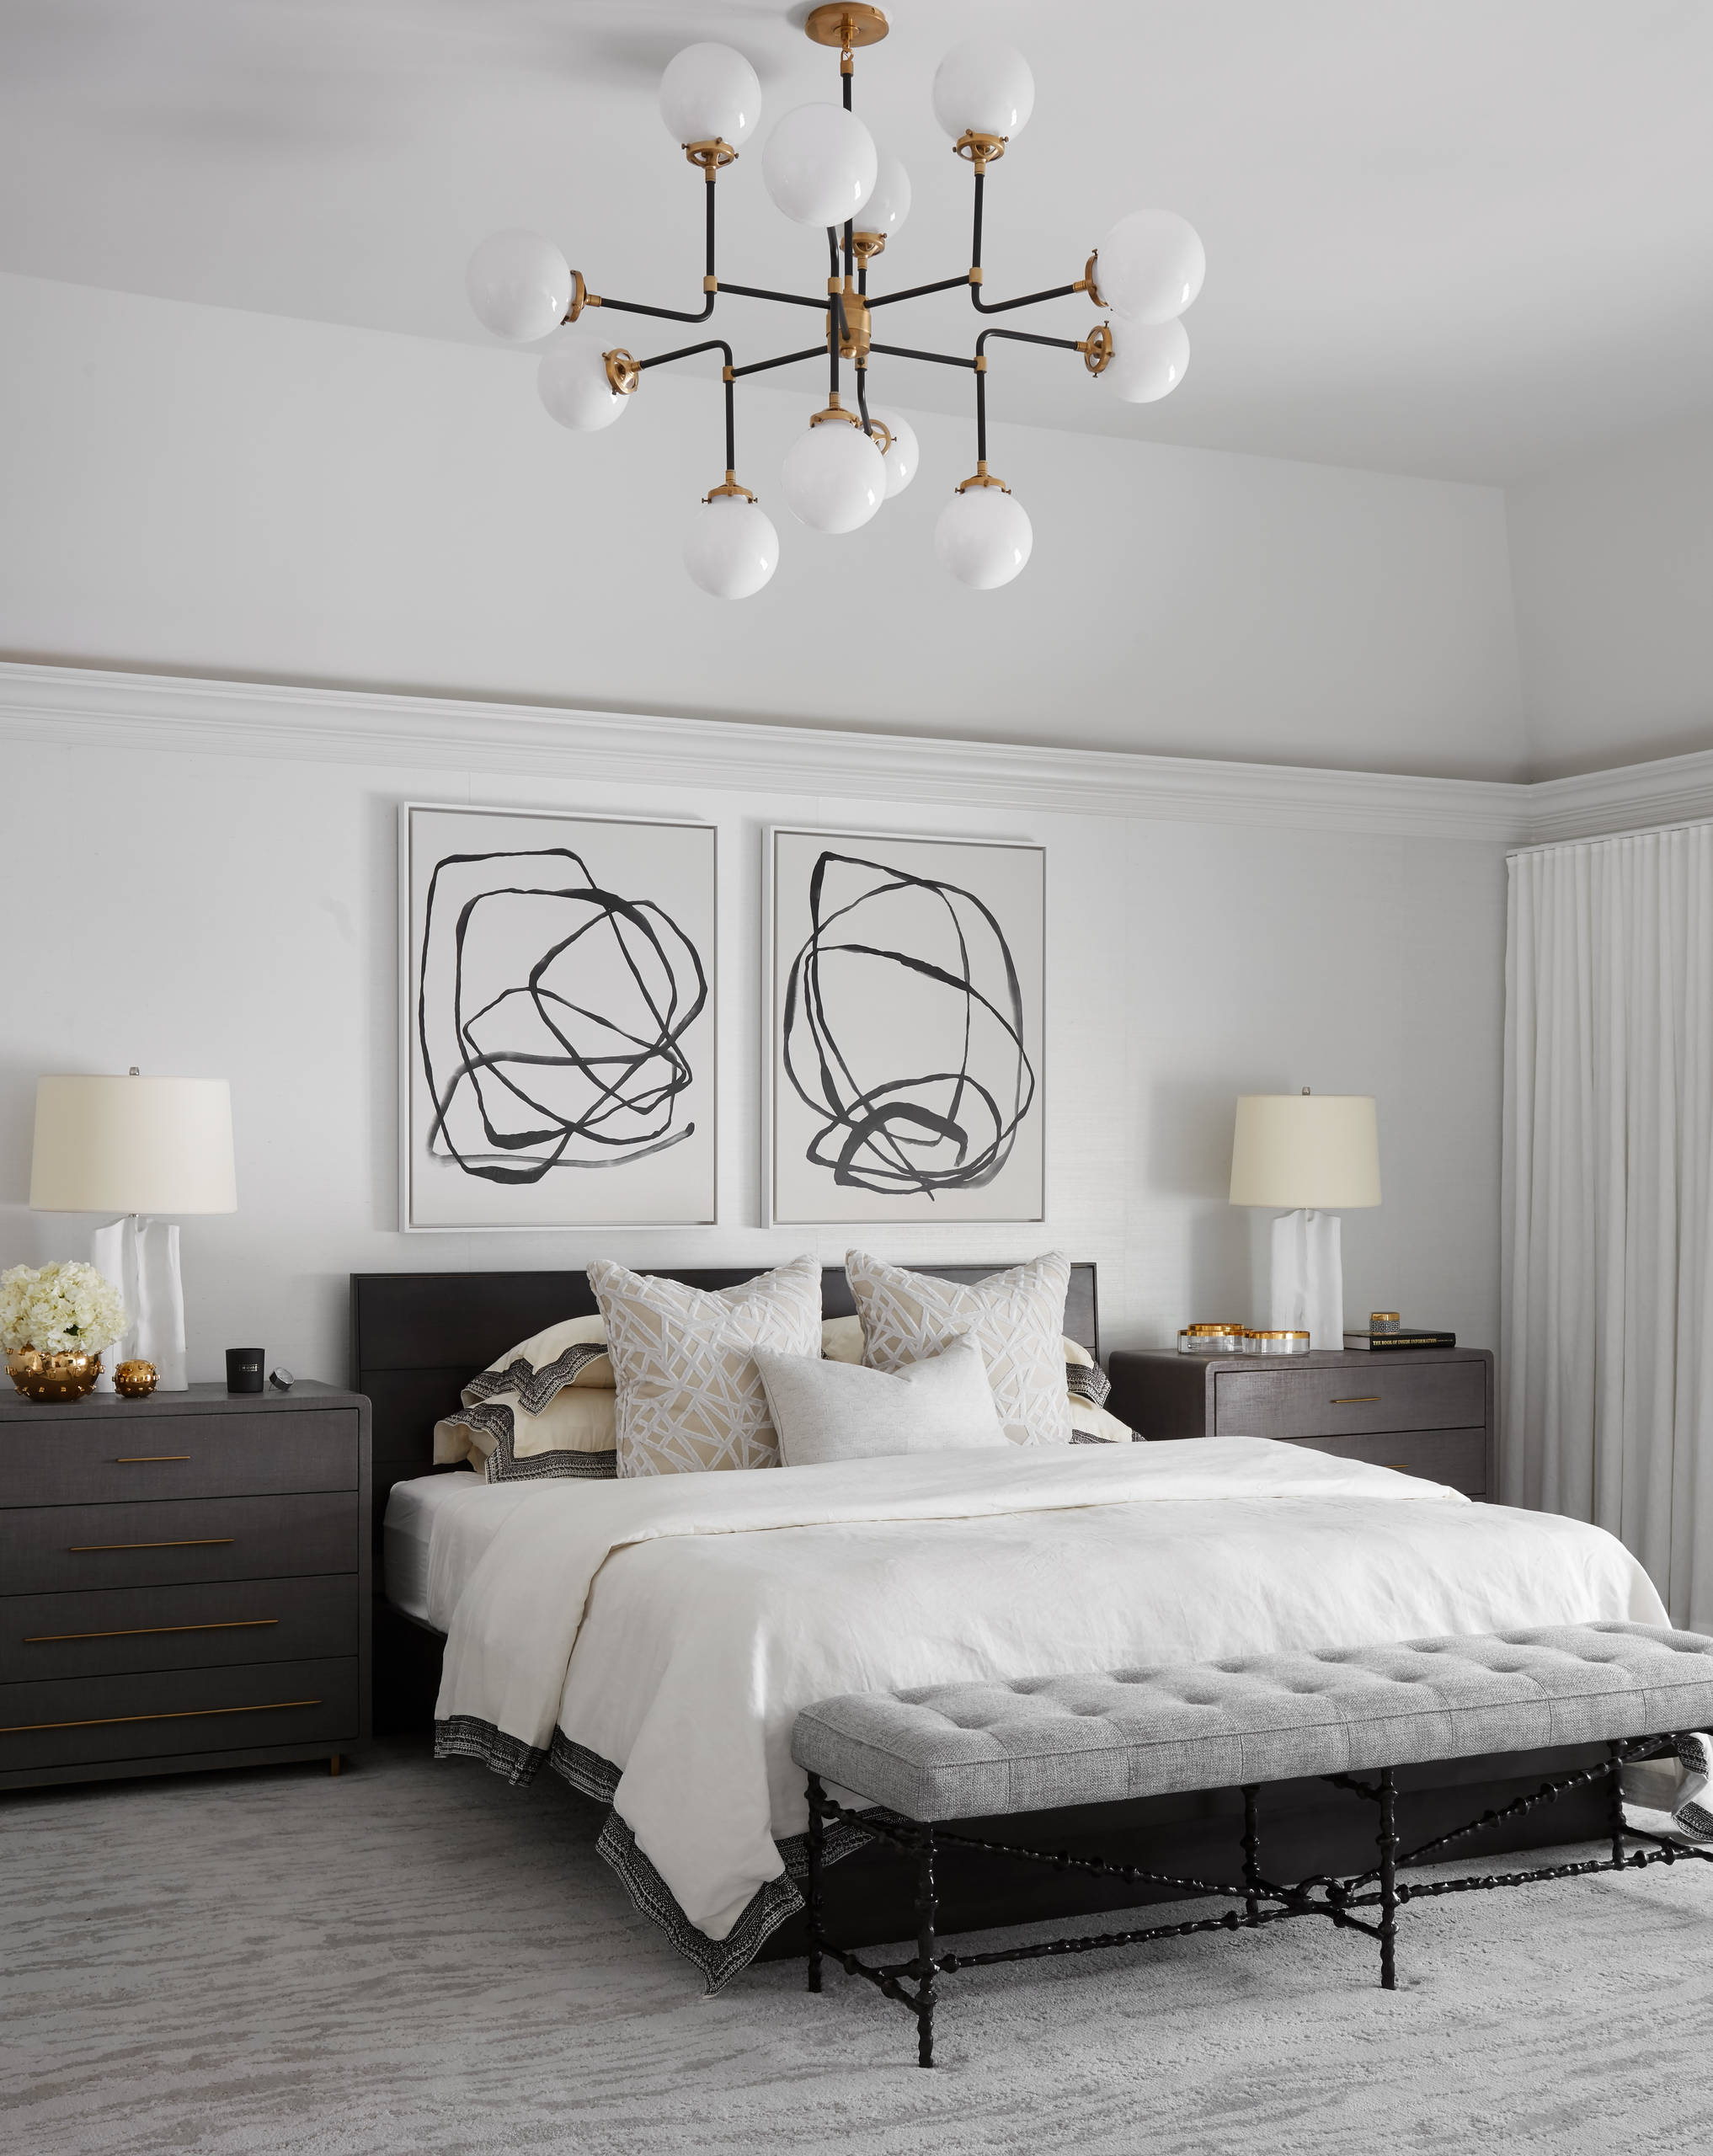 75 Bedroom with White Walls Ideas You'll Love - August, 2023 | Houzz